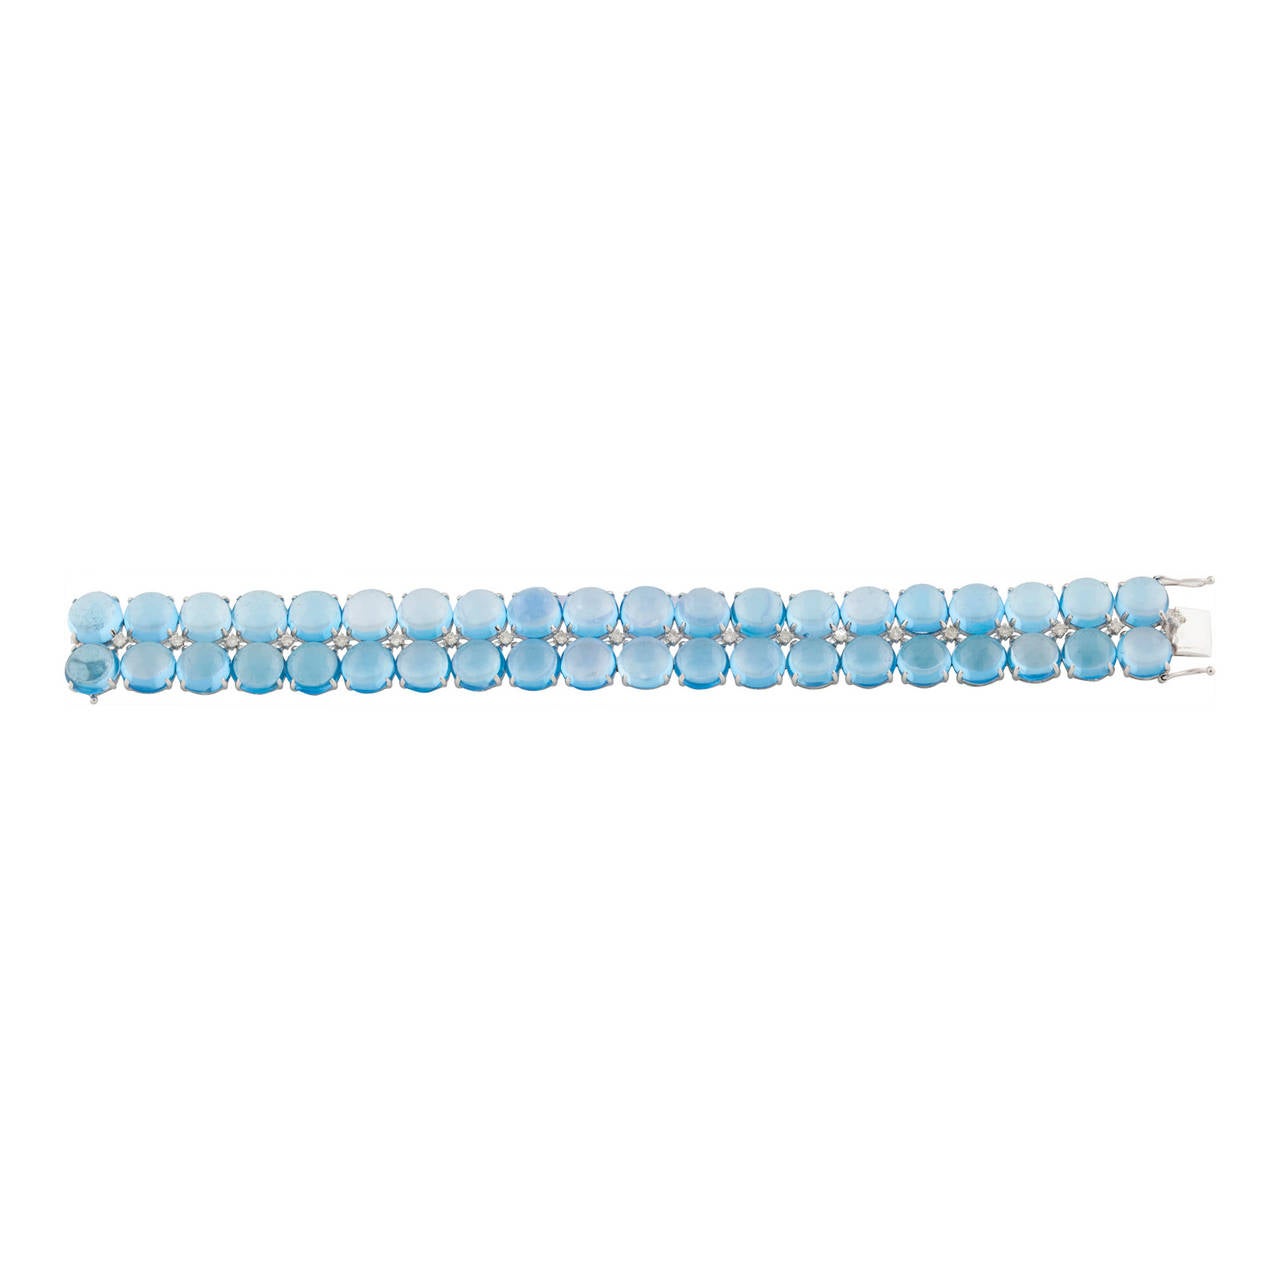 A superb 18ct white gold bracelet with 40 round cabochon cut Blue Topaz, claw set intercepted by 20 round brilliant-cut diamonds.
Estimated total weight of blue topaz: 121.49ct
Estimated total weight of diamonds: 0.62ct
Total weight of bracelet: